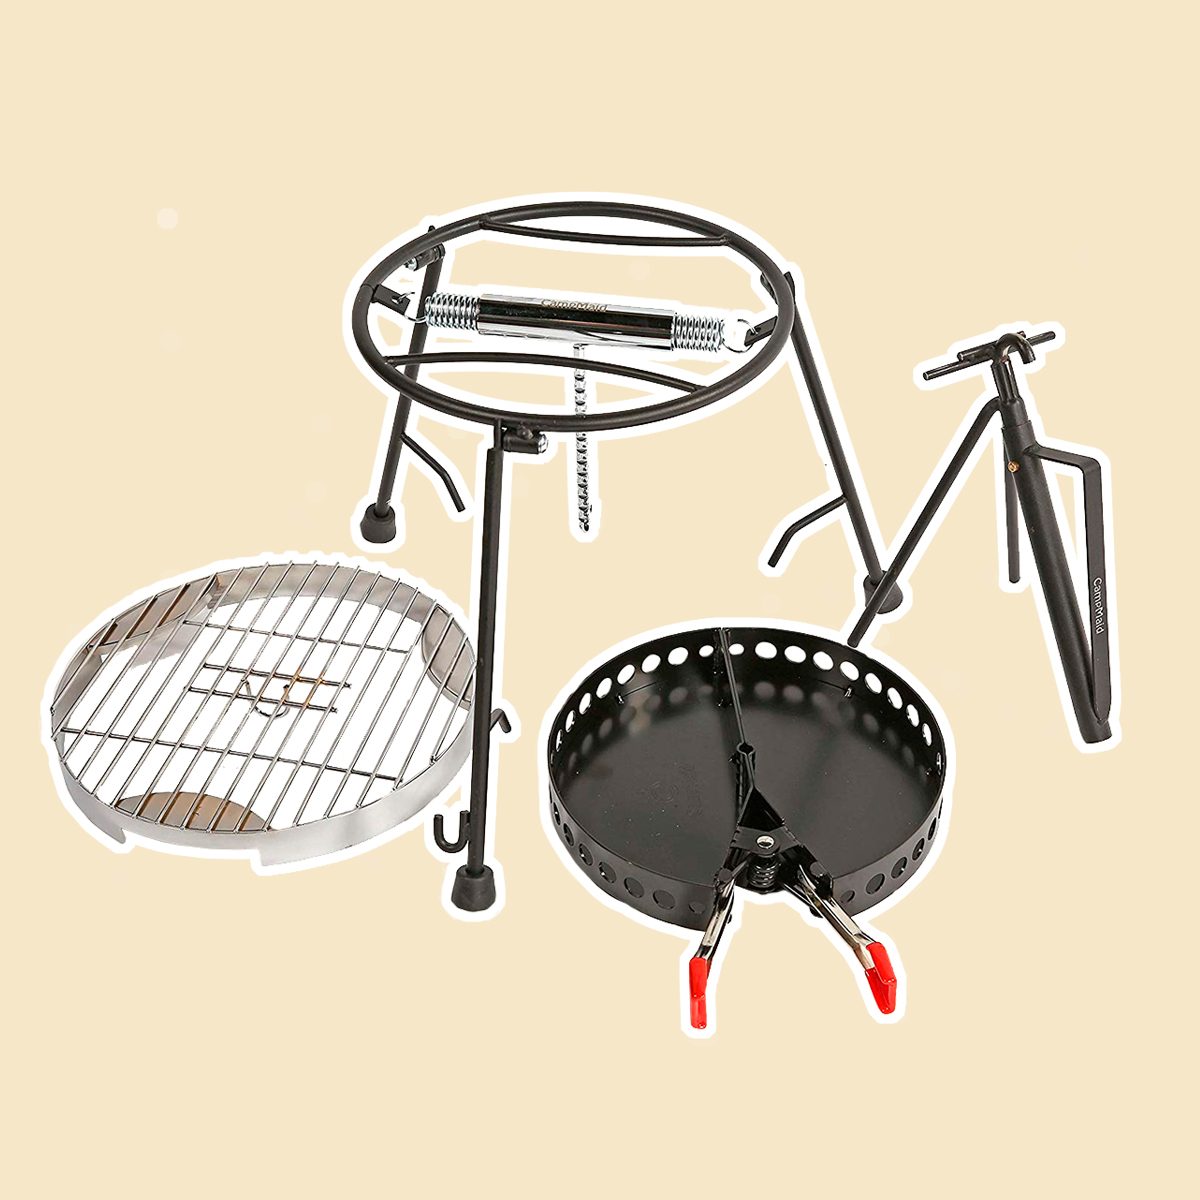 https://www.tasteofhome.com/wp-content/uploads/2020/01/CampMaid-4-Piece-Combo-Lid-holder-Charcoal-Holder-Flip-Grill-and-Kick-Stand-Perfect-for-Outdoor-Adventures-Family-Friends-.jpg?fit=700%2C700